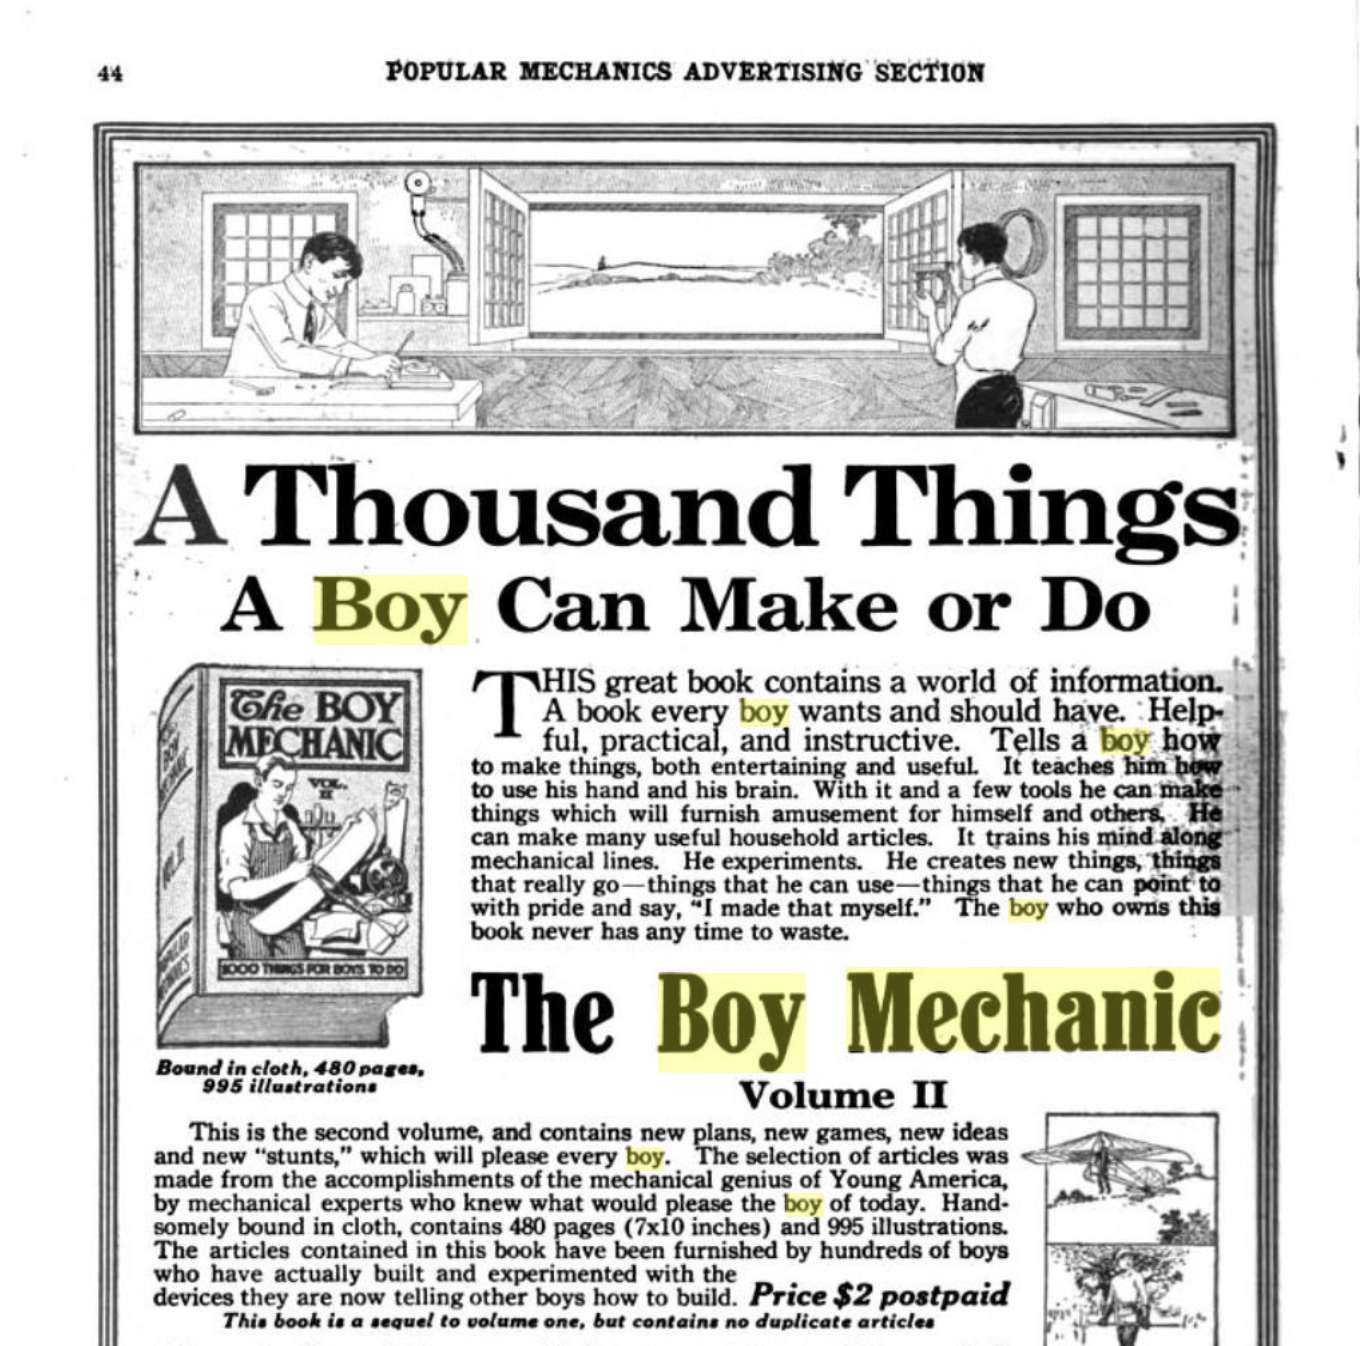 Recommended: “The Boy Mechanic”